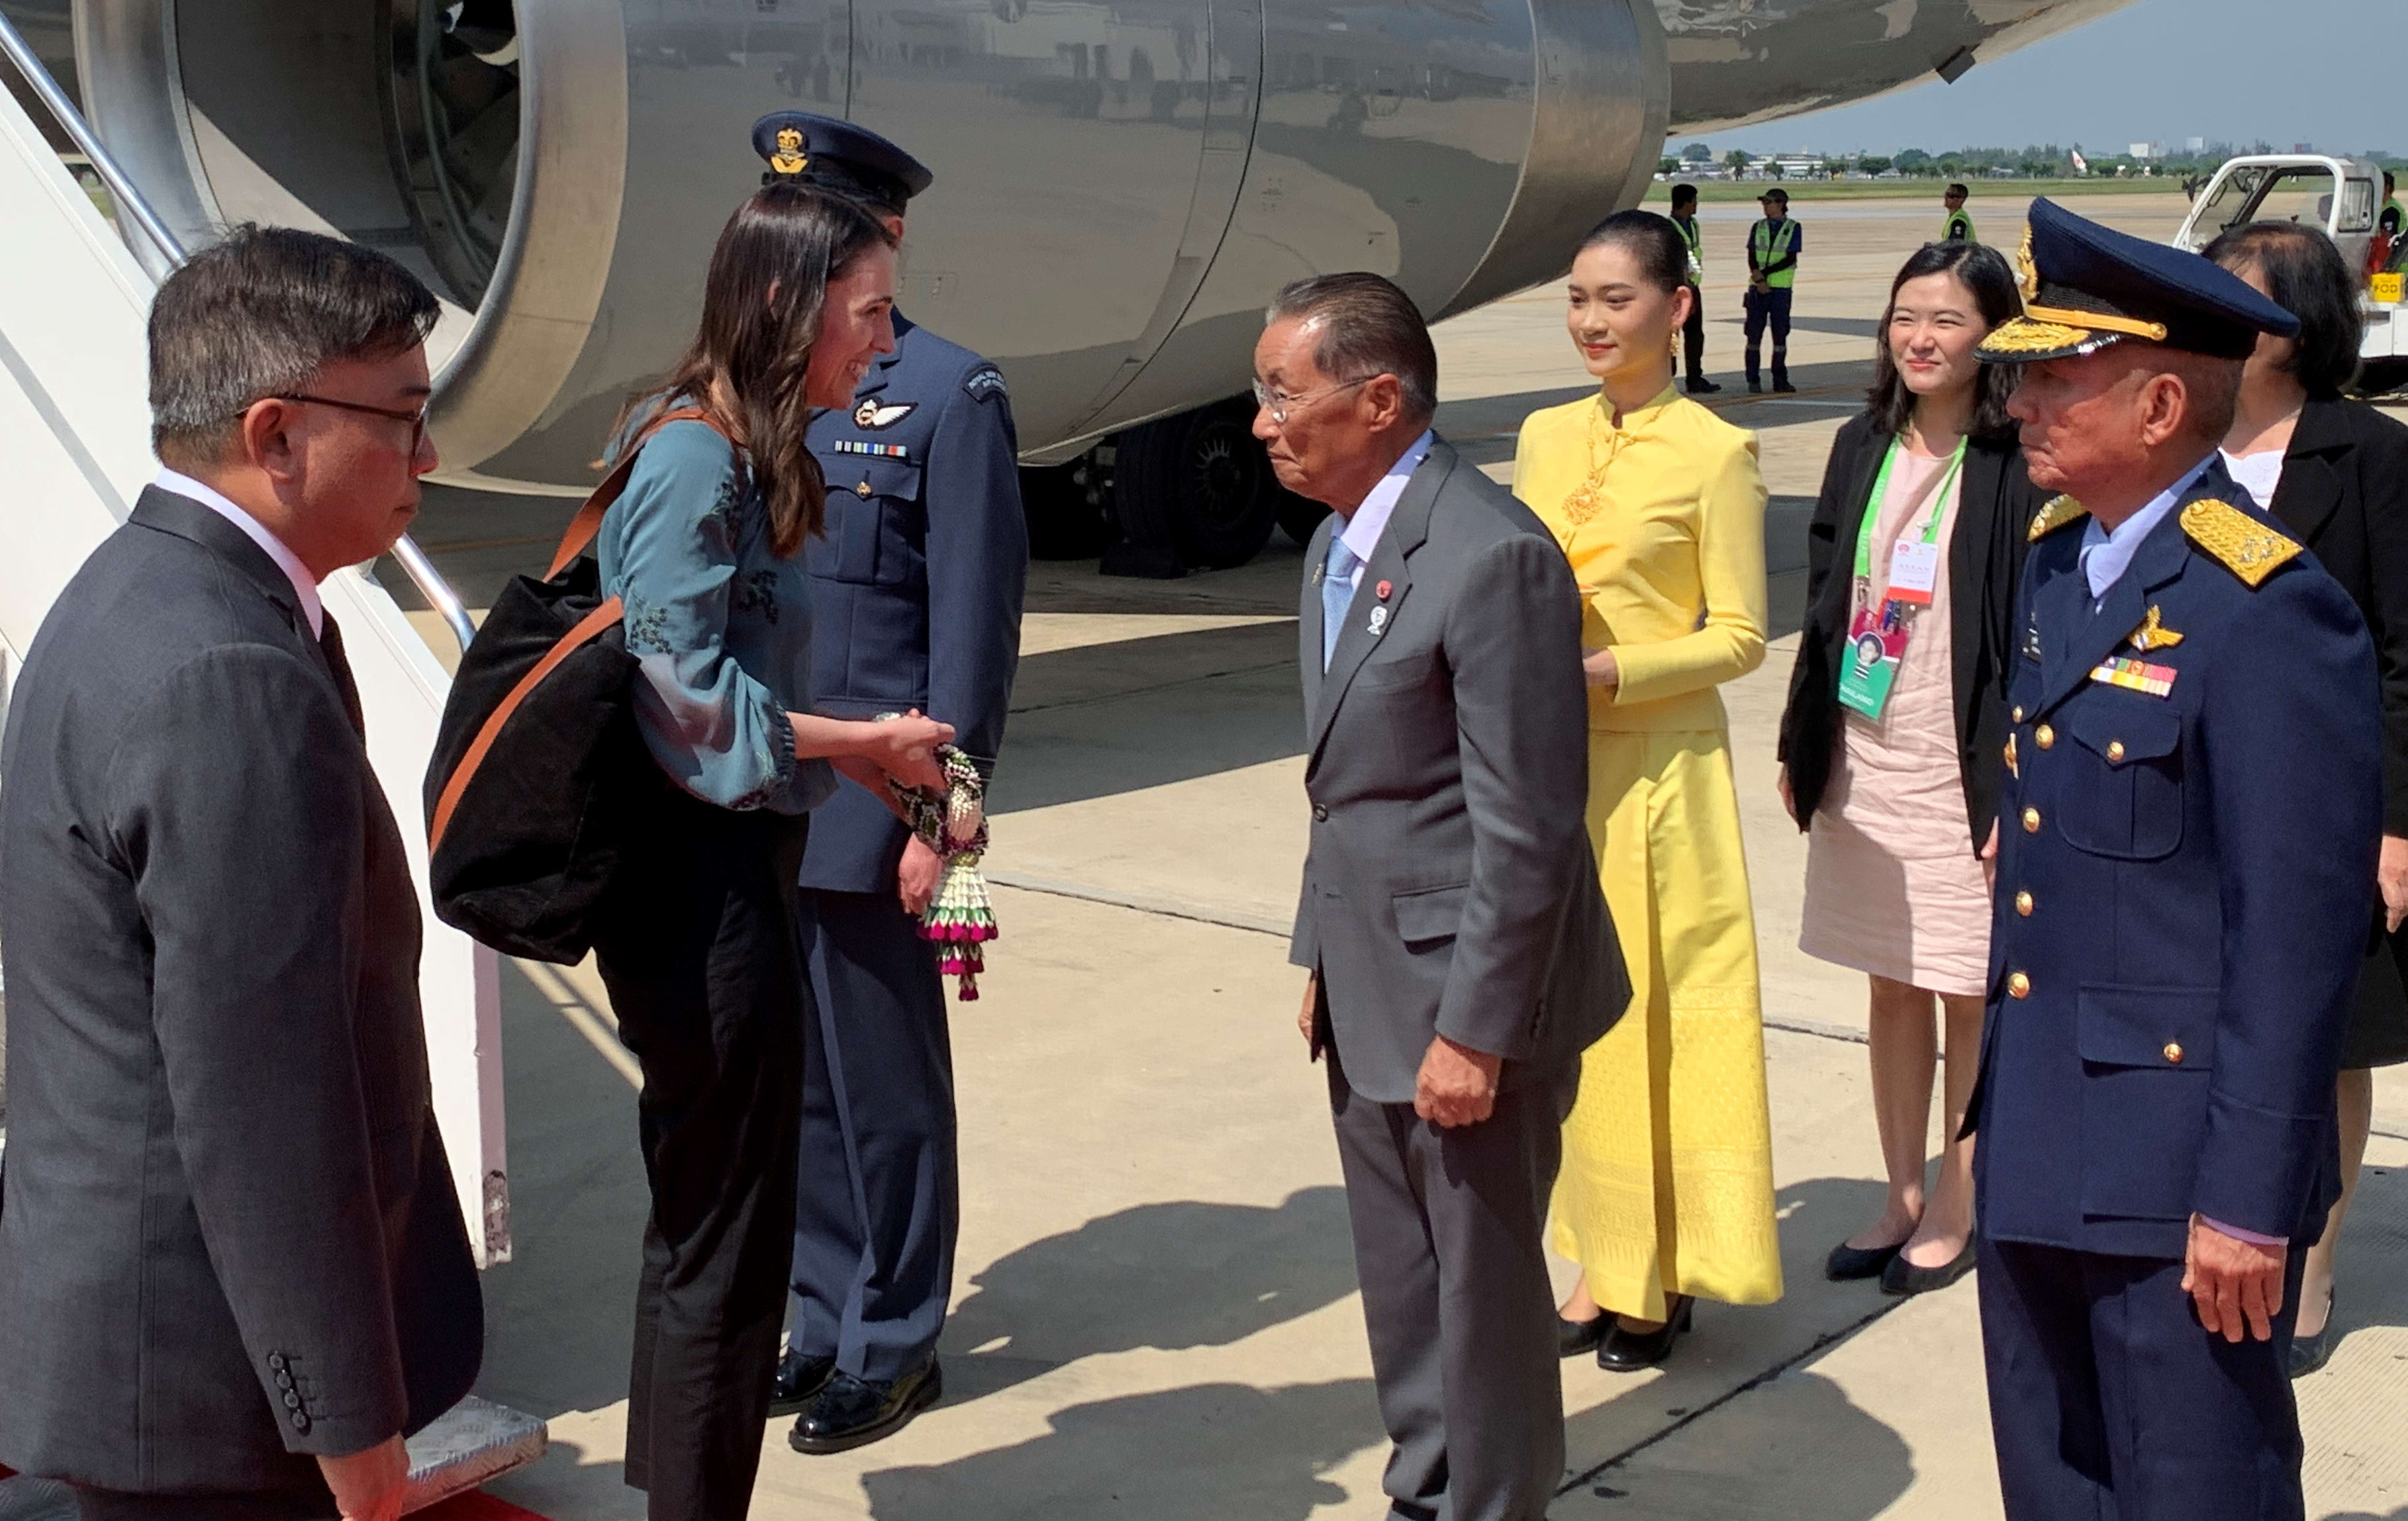 Prime Minister Jacinda Ardern is greeted by Thai's Minister of Labour, M.R. Chatu Mongol Sonakul, upon arrival to Bangkok for the East Asian Summit.